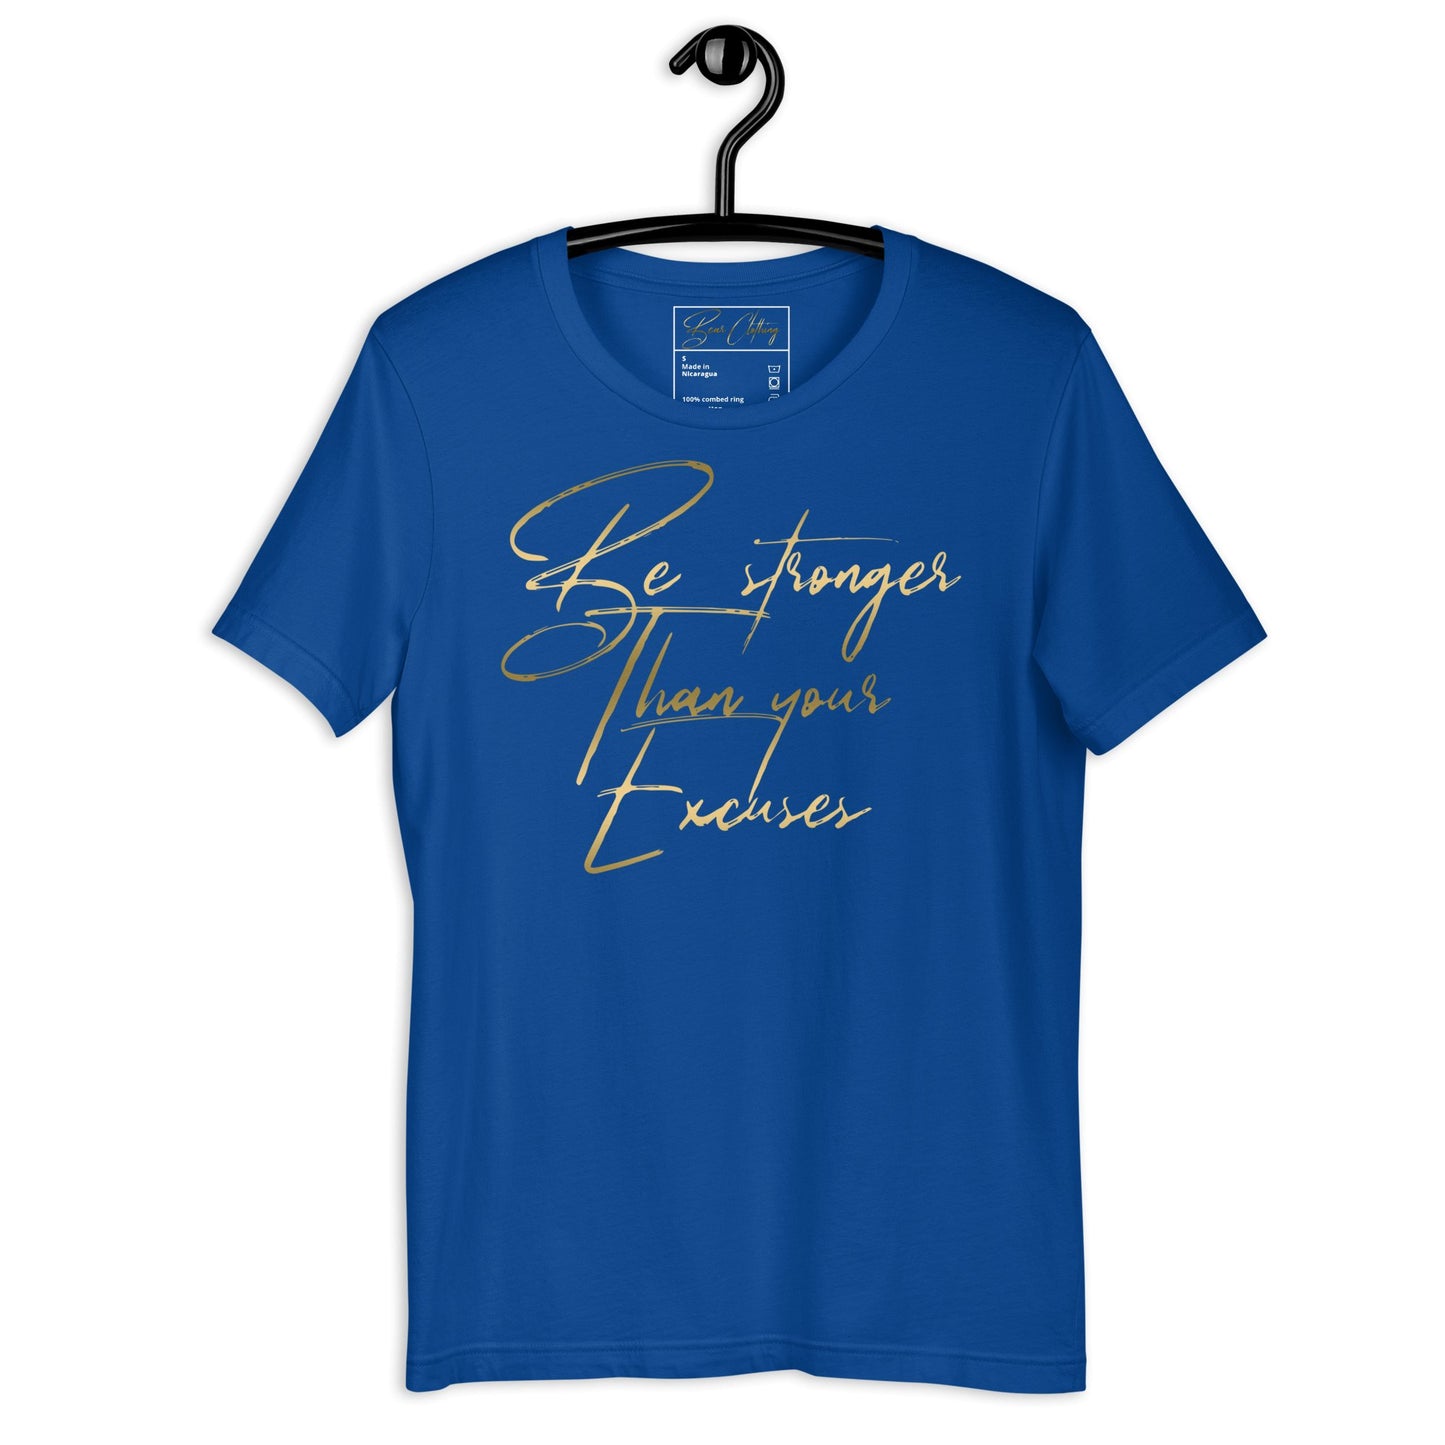 Gold Stronger Than Your Excuses Women's Premium Tee - Bearclothing